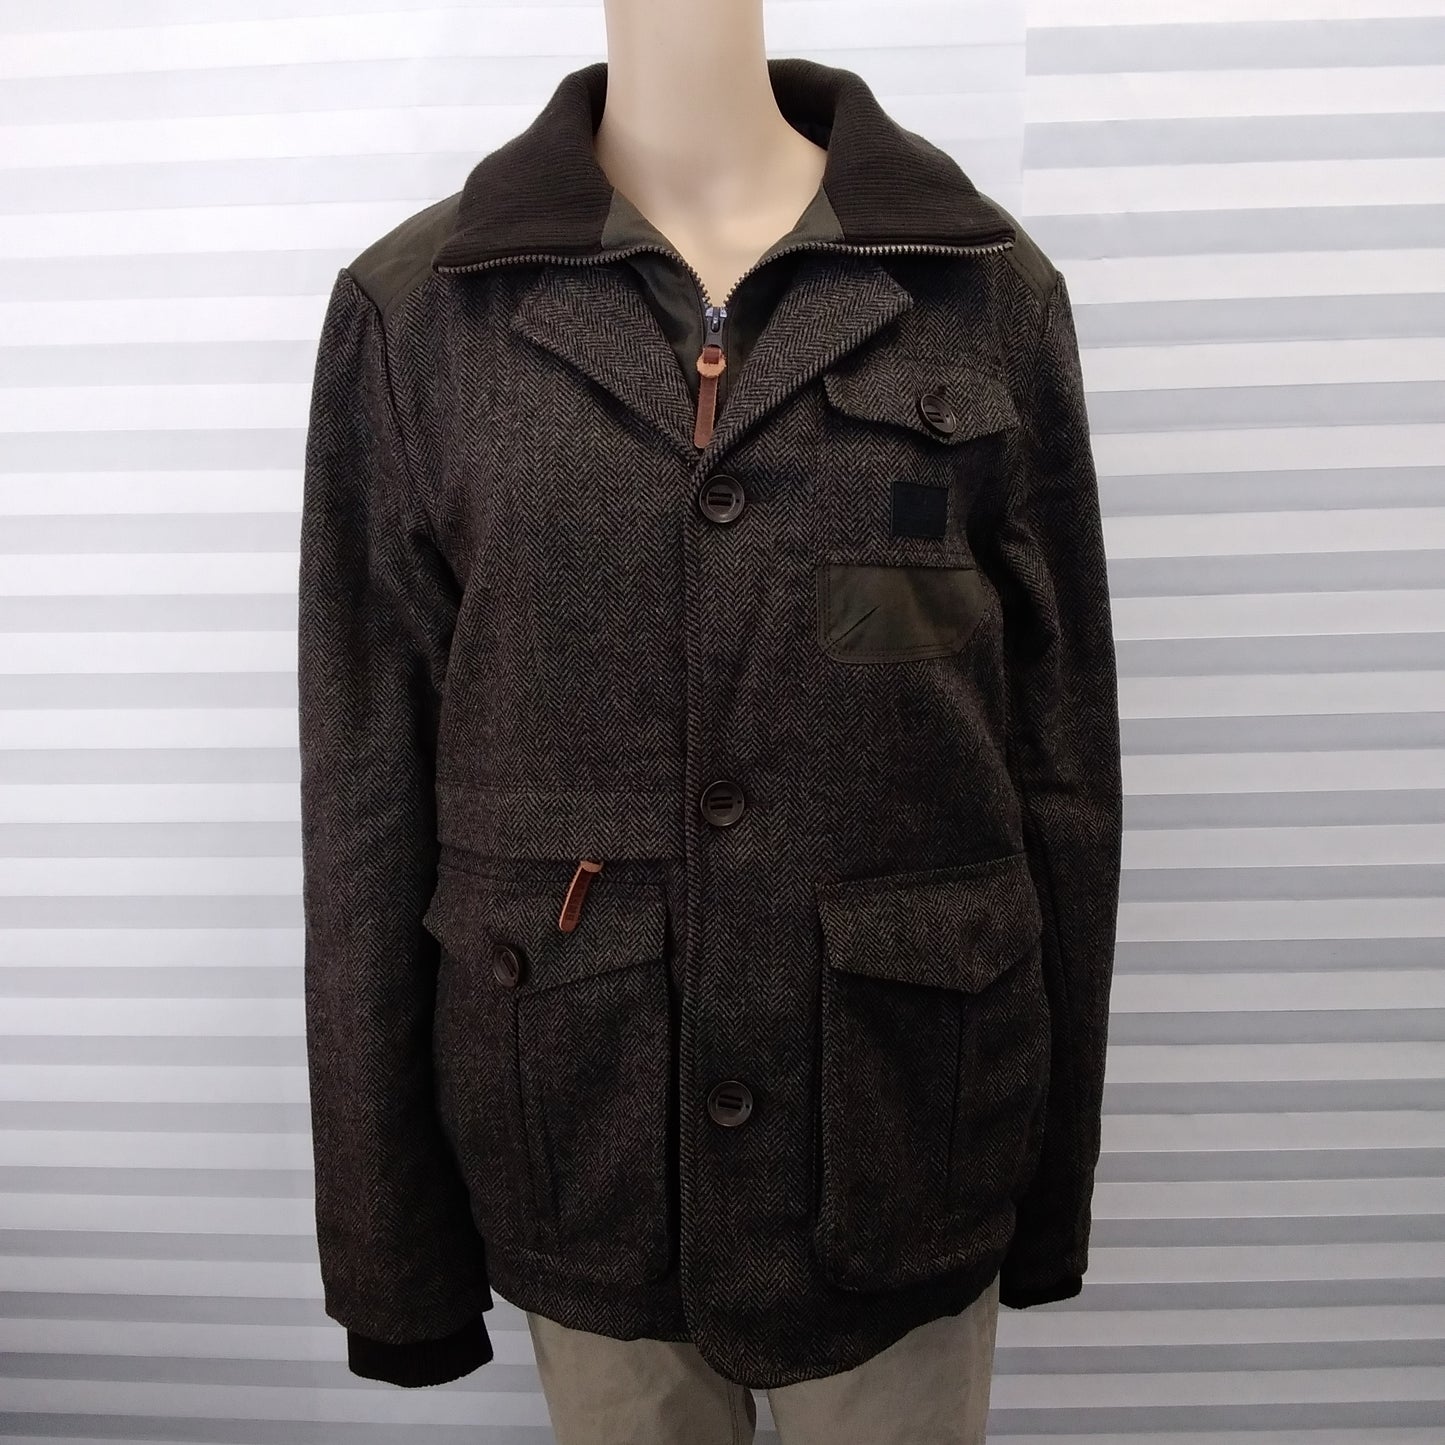 NWT RETRO - Third & Army Co. Charcoal Grey Insulated Tweed Jacket - S